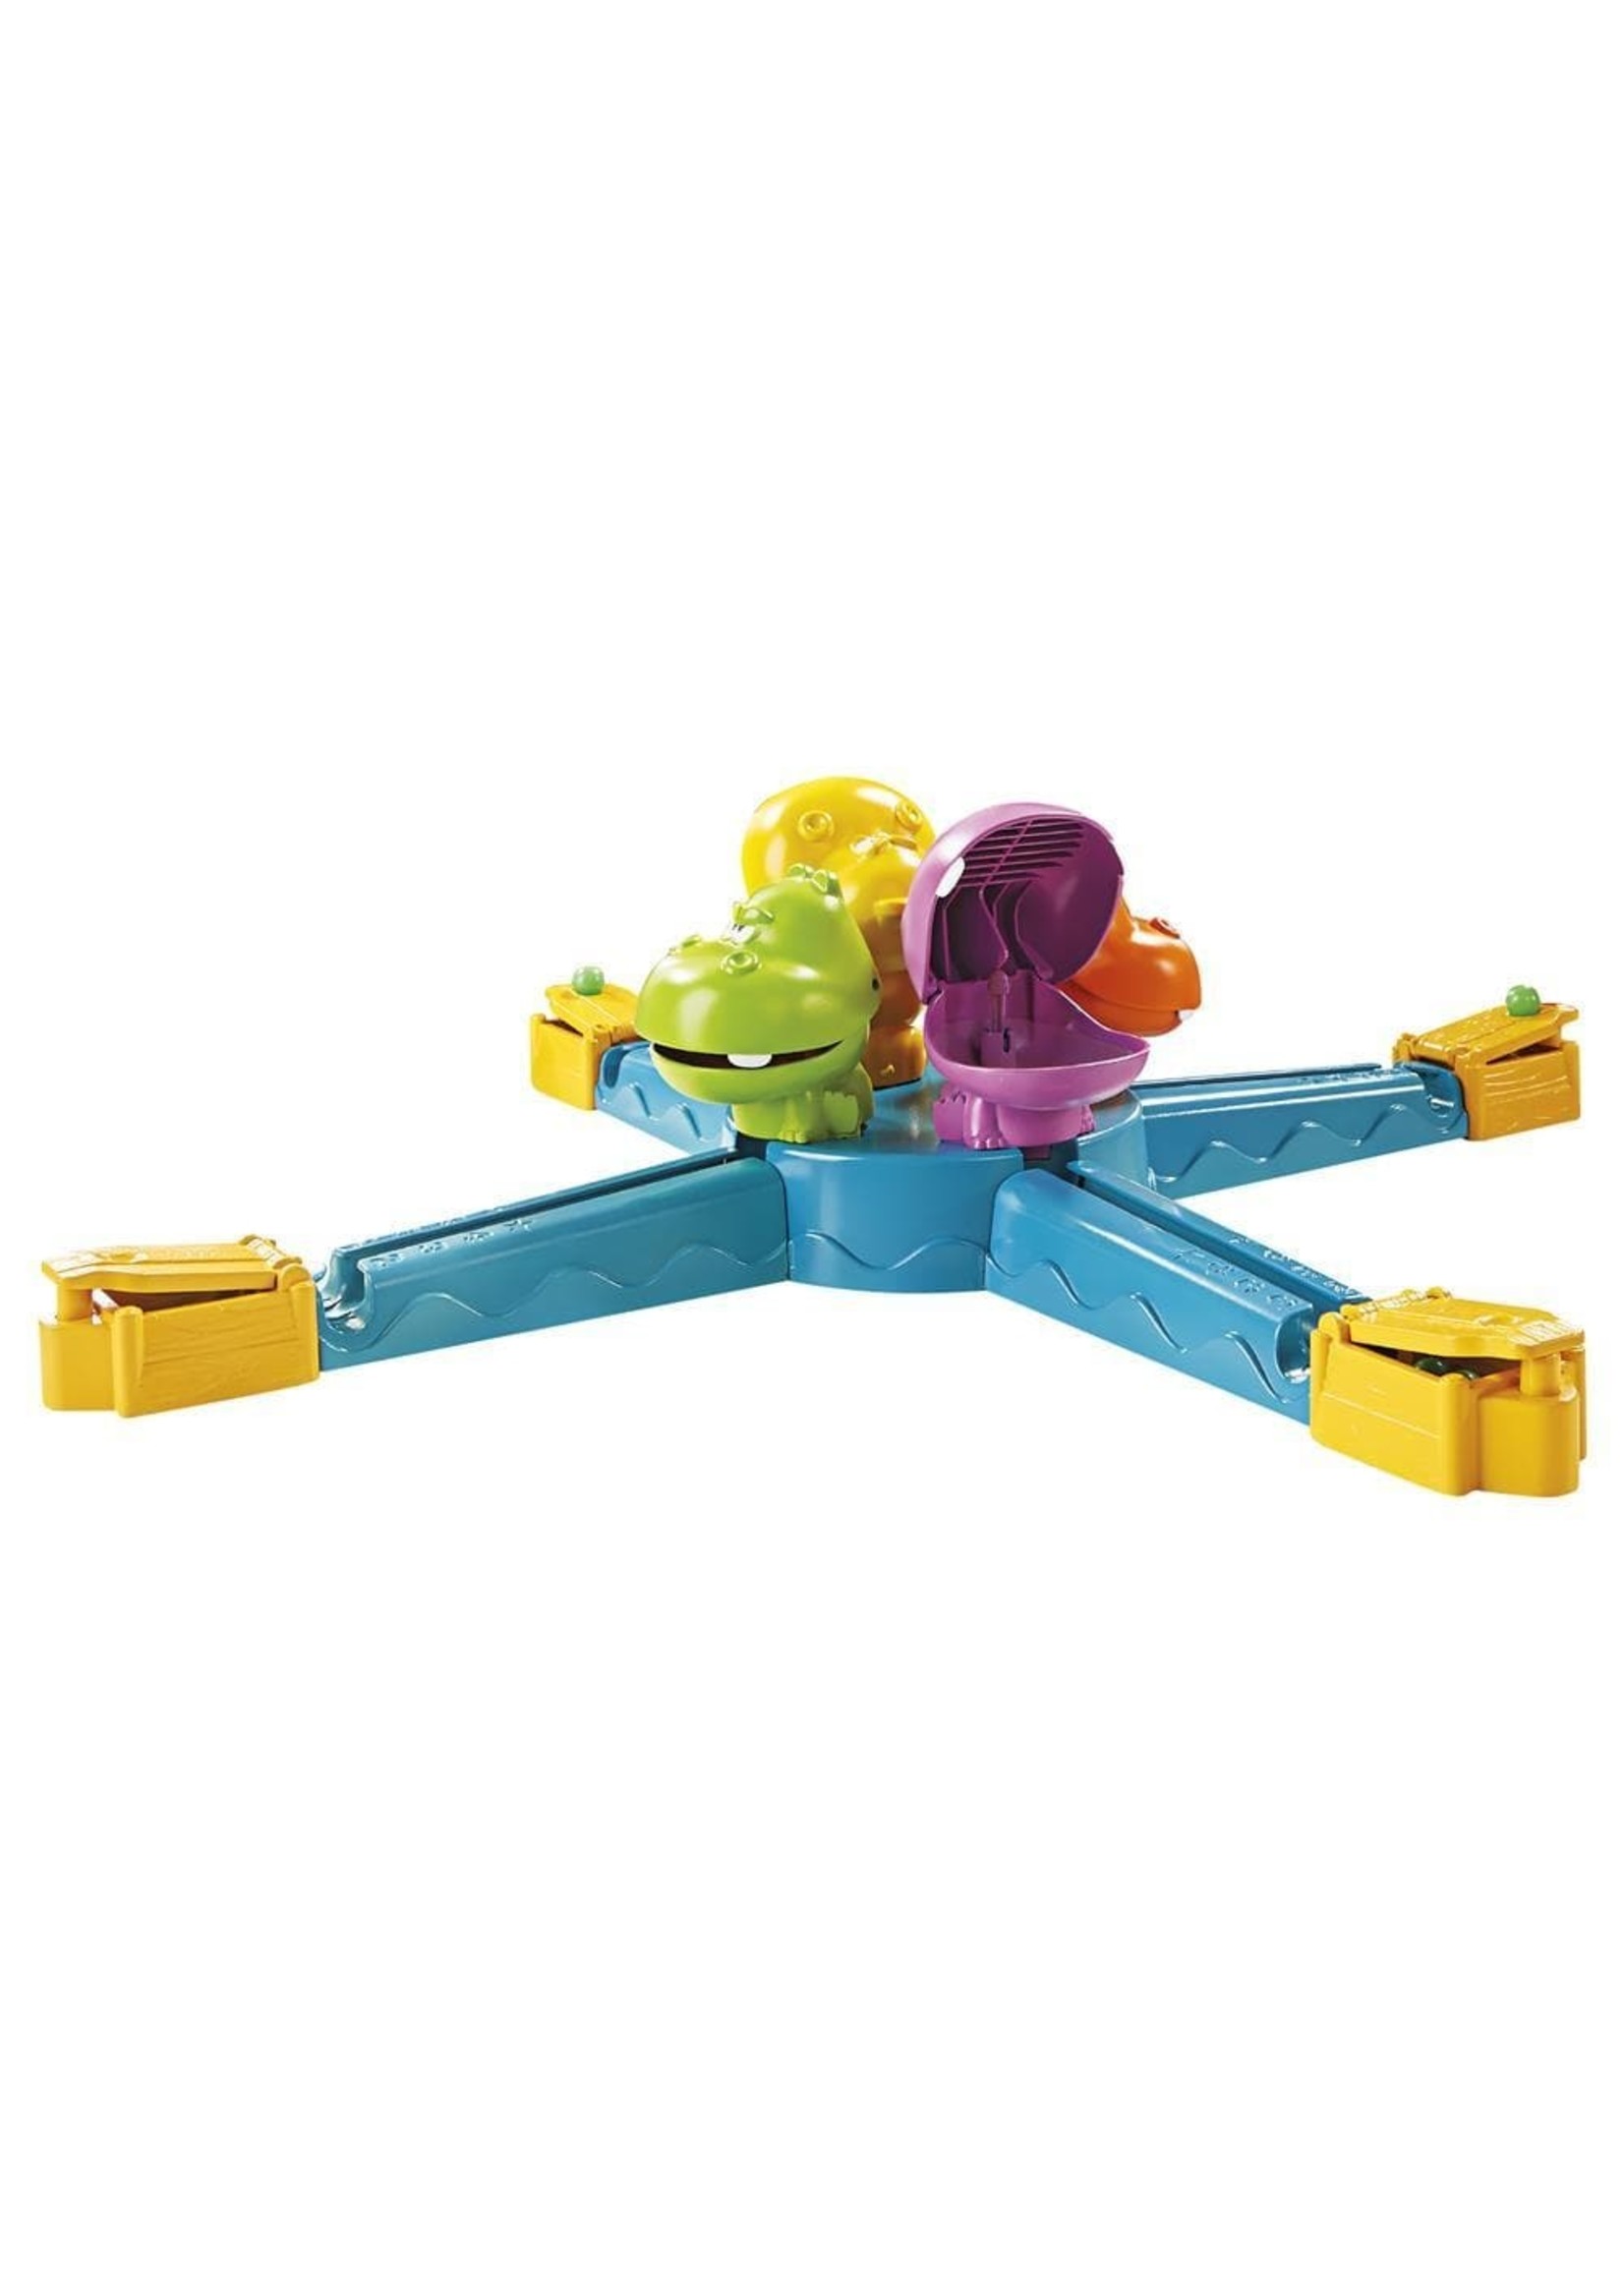 Hasbro Hungry hungry hippos launchers